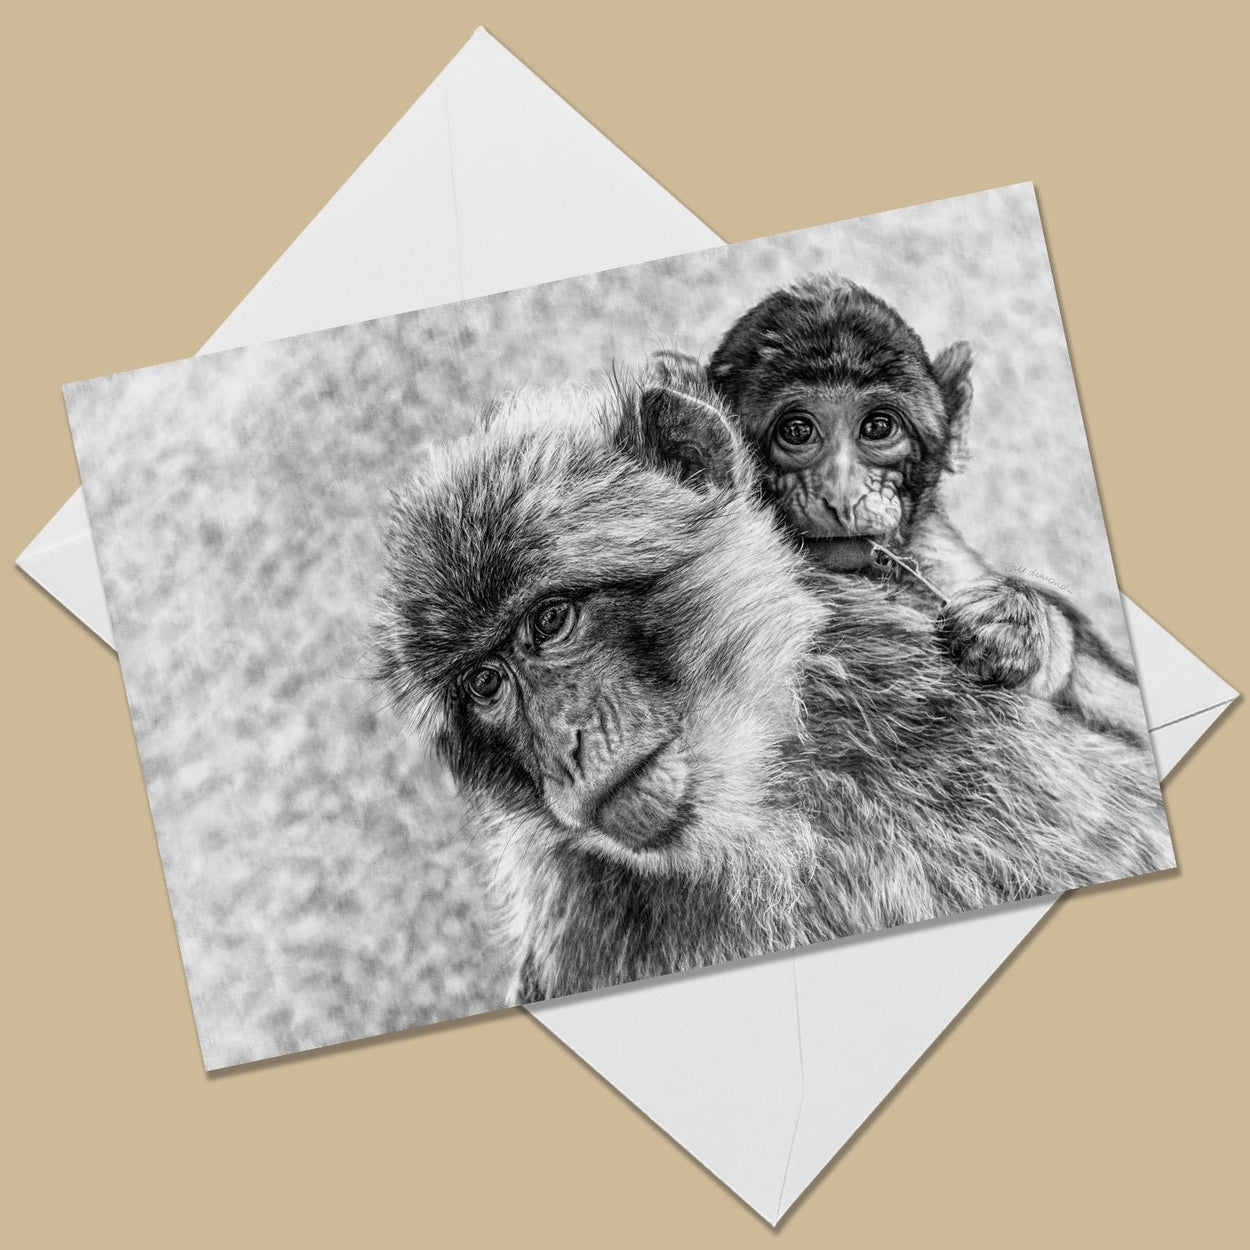 Mama & Baby Macaques Greeting Card - The Thriving Wild